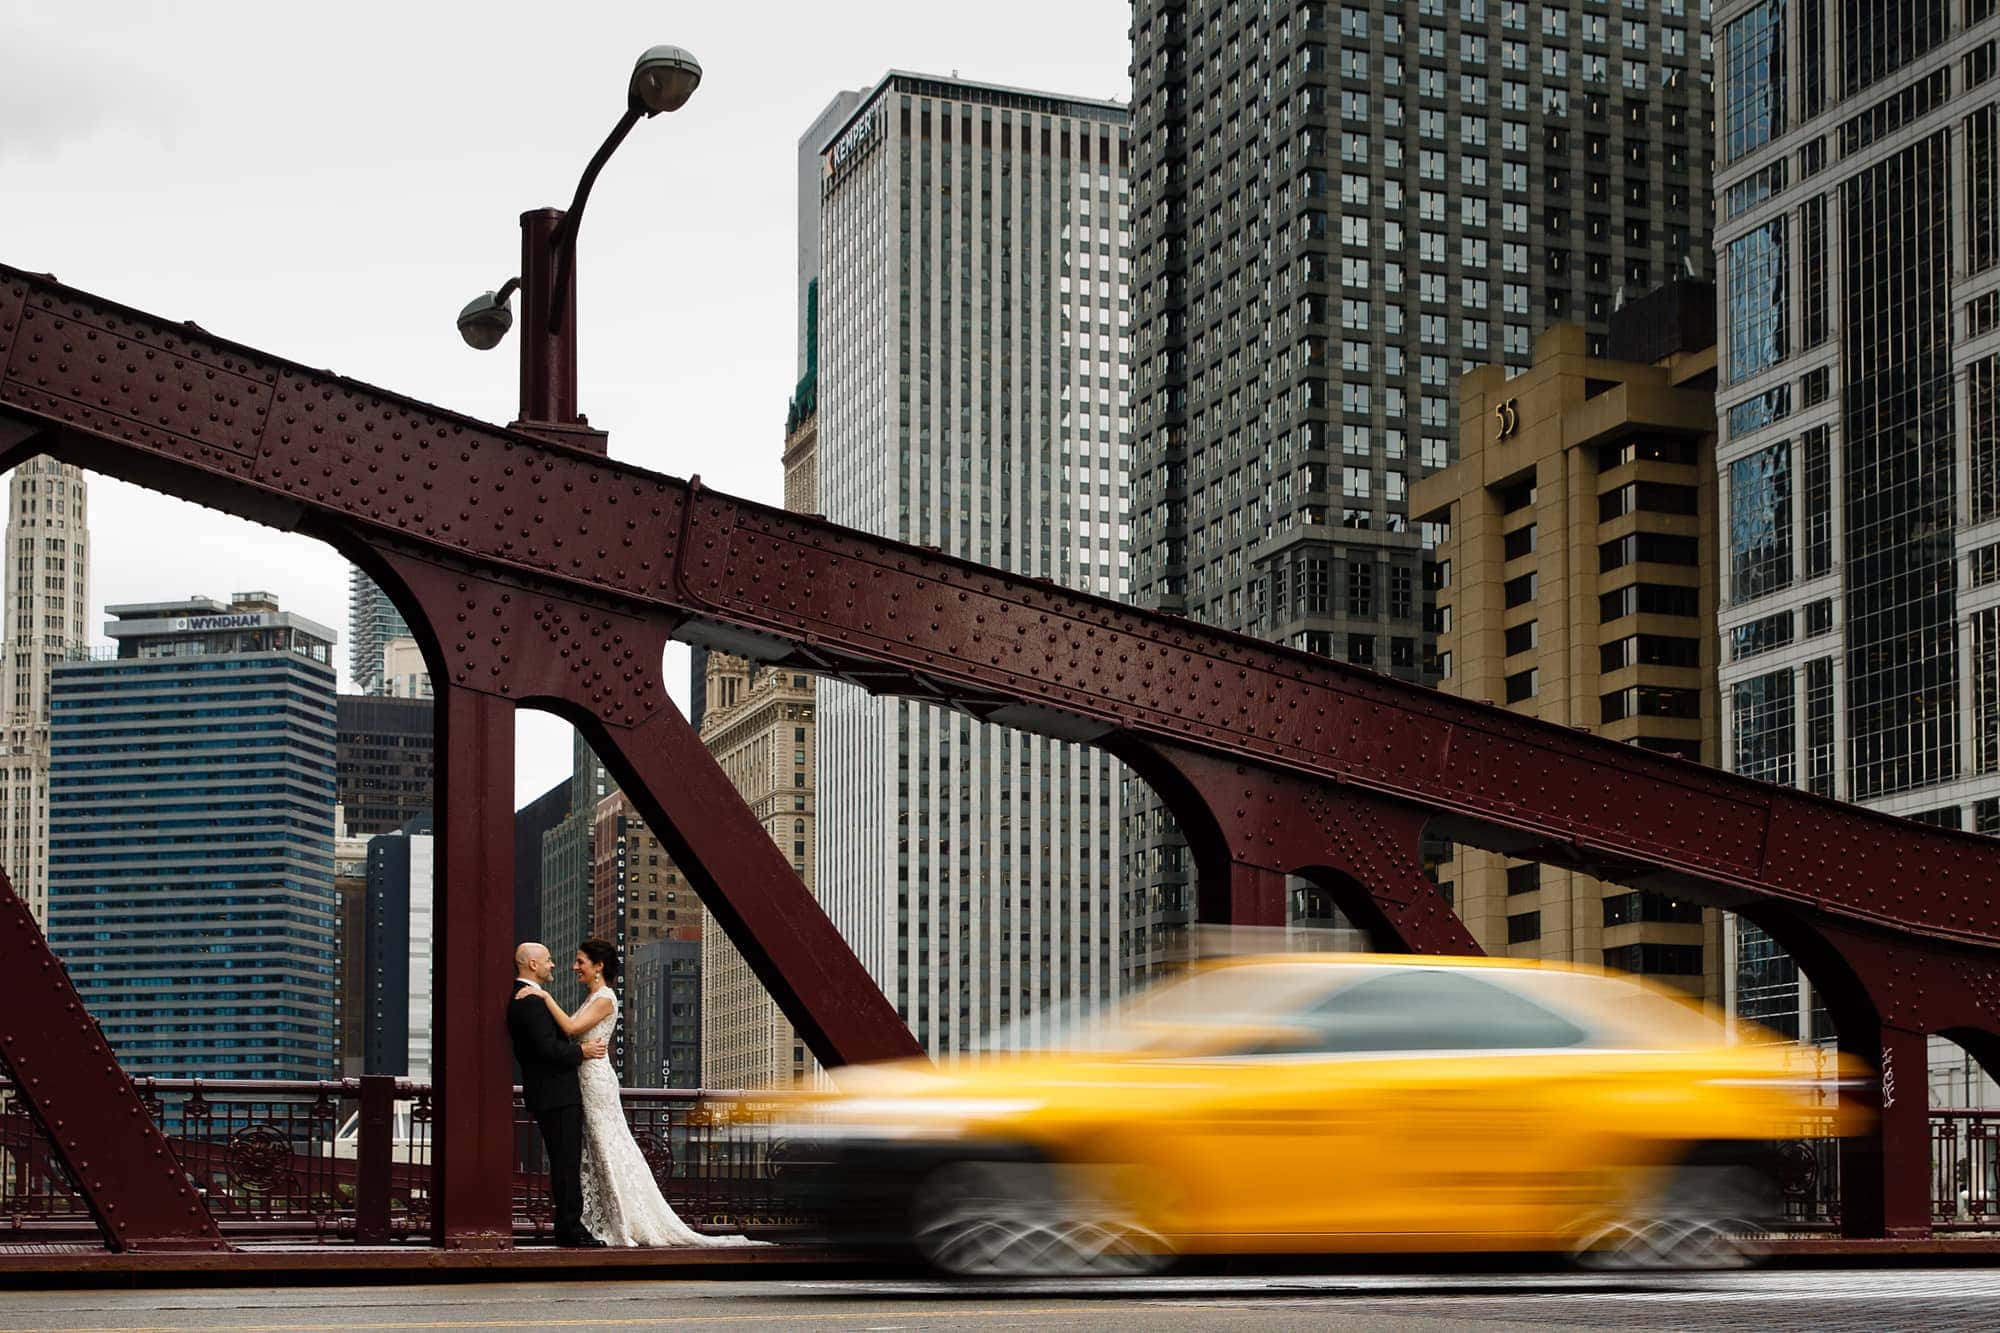 Christina and Brad share a moment together on their wedding day near the State Street bridge as a taxi drives by